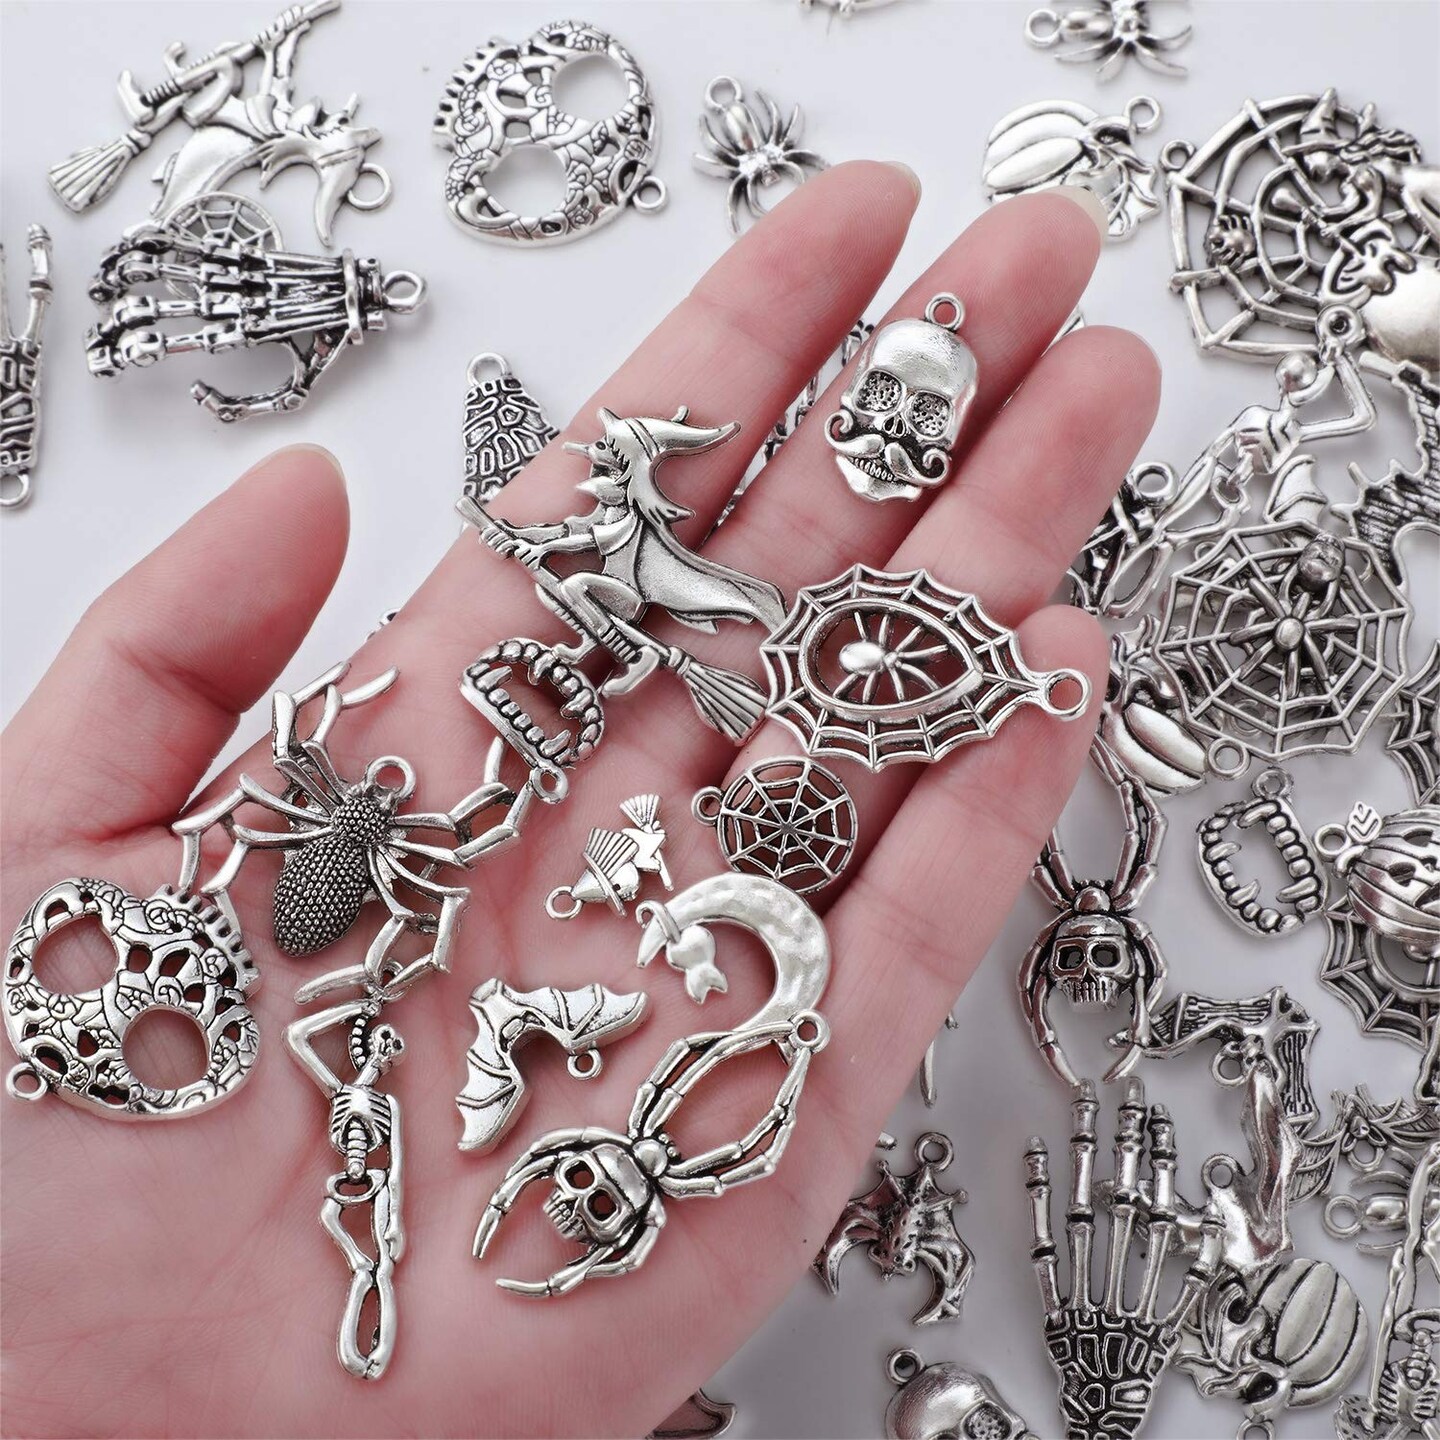 Hicarer 80 Pieces Halloween Charms Pendants Antique Silver Pendants Halloween Jewelry Making Accessory for DIY Necklace Bracelet